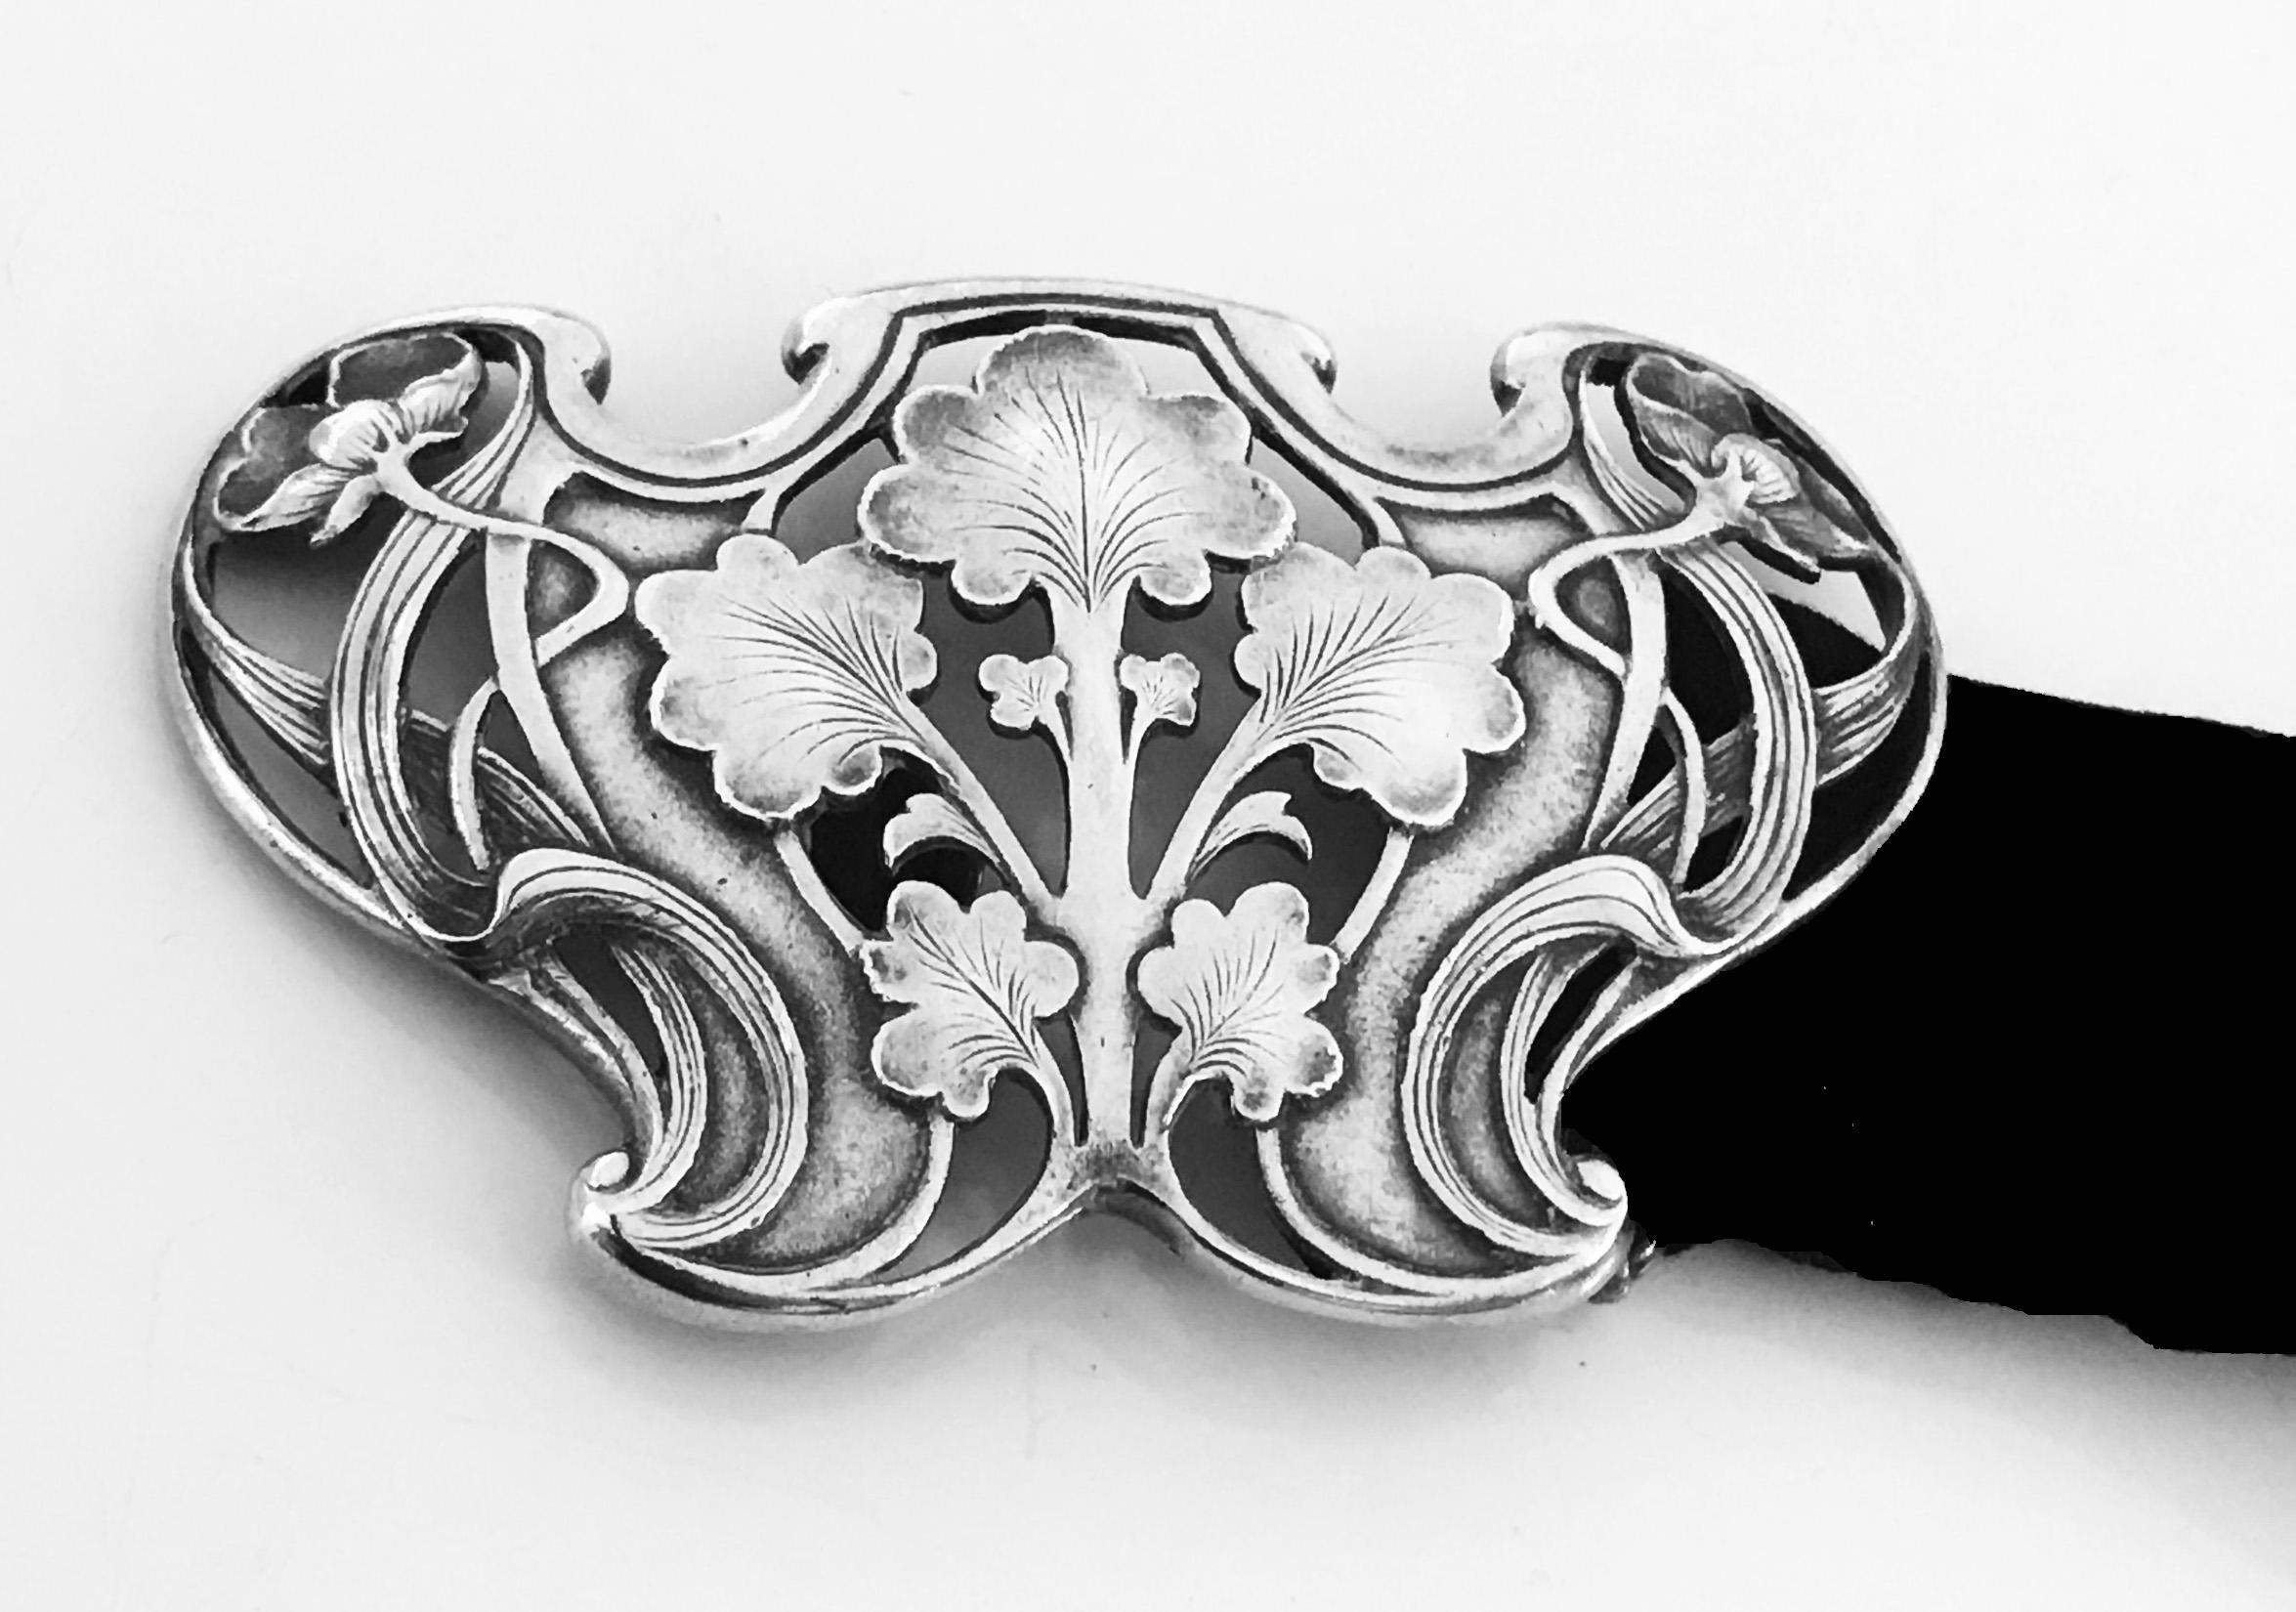 Gorham Art Nouveau Sterling Buckle, 1902. Marks for Gorham Sterling and B1949 copyrighted with 1902 (year). Beautiful open floral nouveau whiplash design against stippled background. Measures: 2.75 x 1.75 inches.